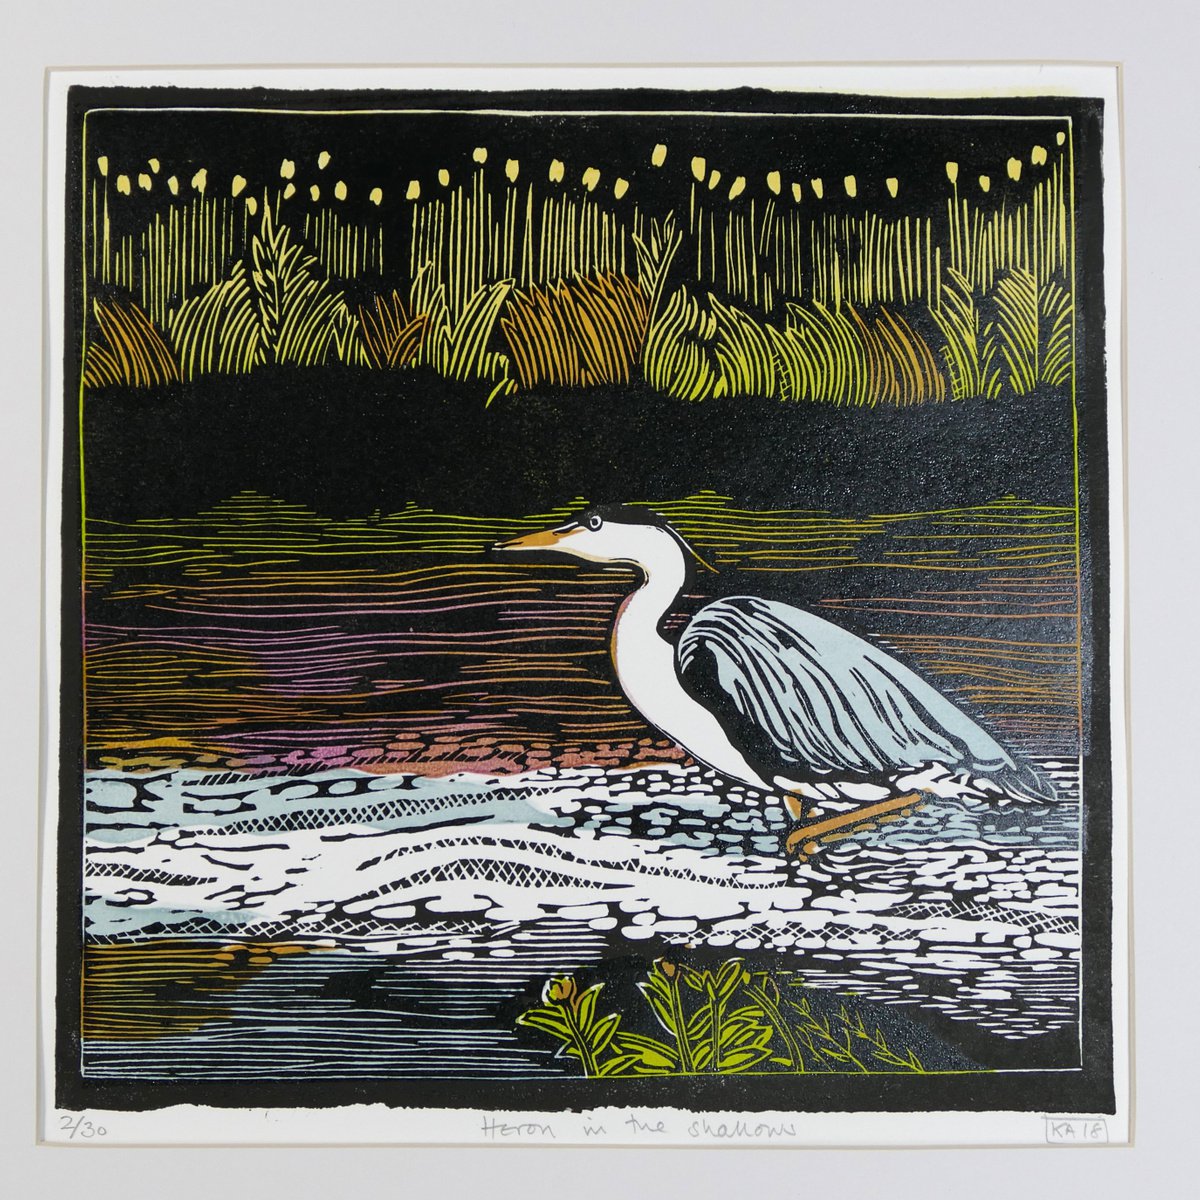 Heron in the shallows by Keith Alexander